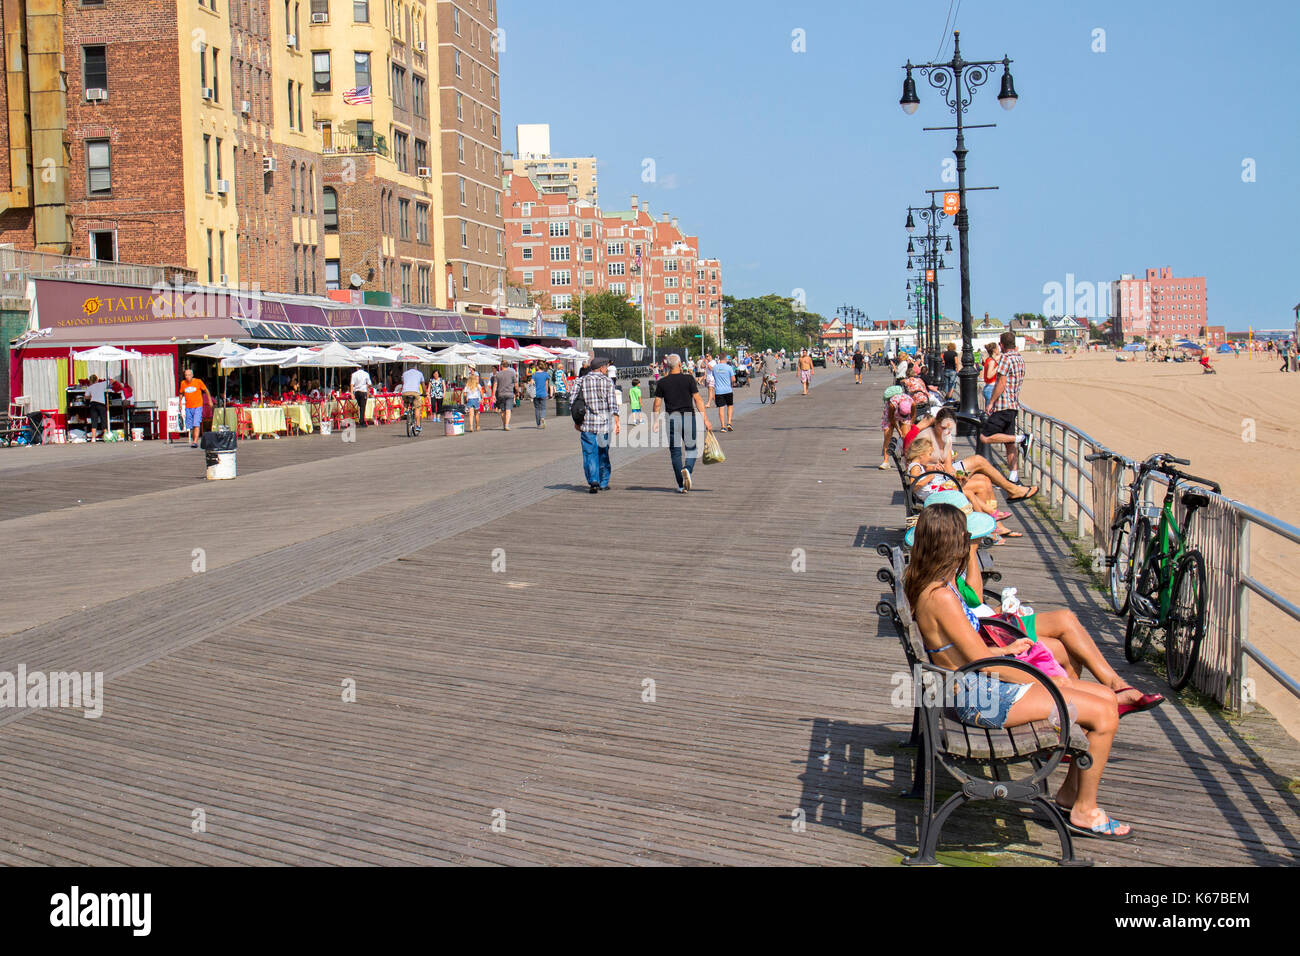 The Brighton Beach area of Brooklyn, known for the Russian immigrants who live here. Stock Photo